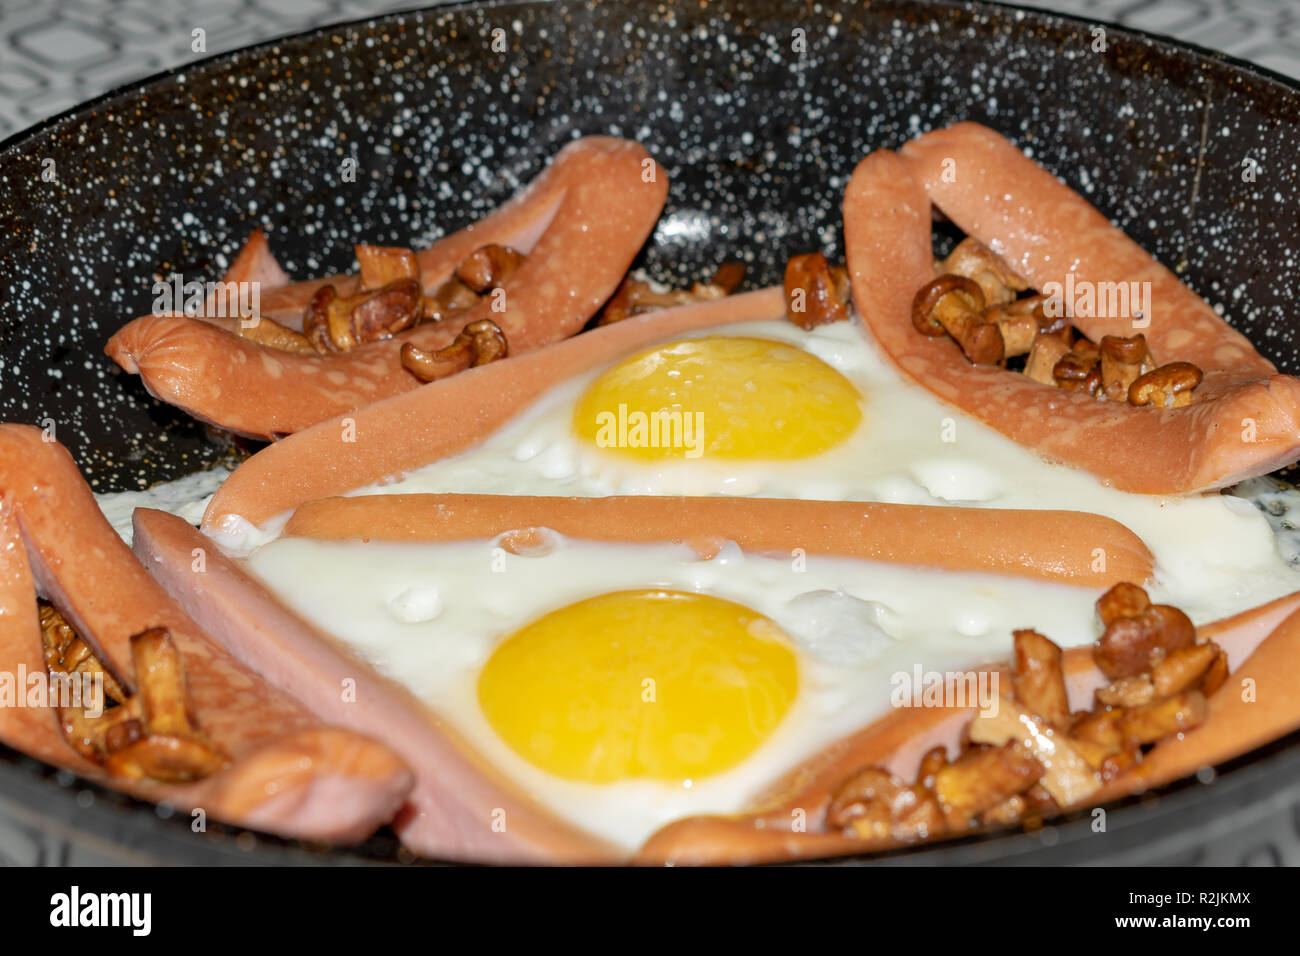 Cast iron pan with fried eggs, sausage, mushrooms and beans on a wooden table. Top view, delicious food. Stock Photo